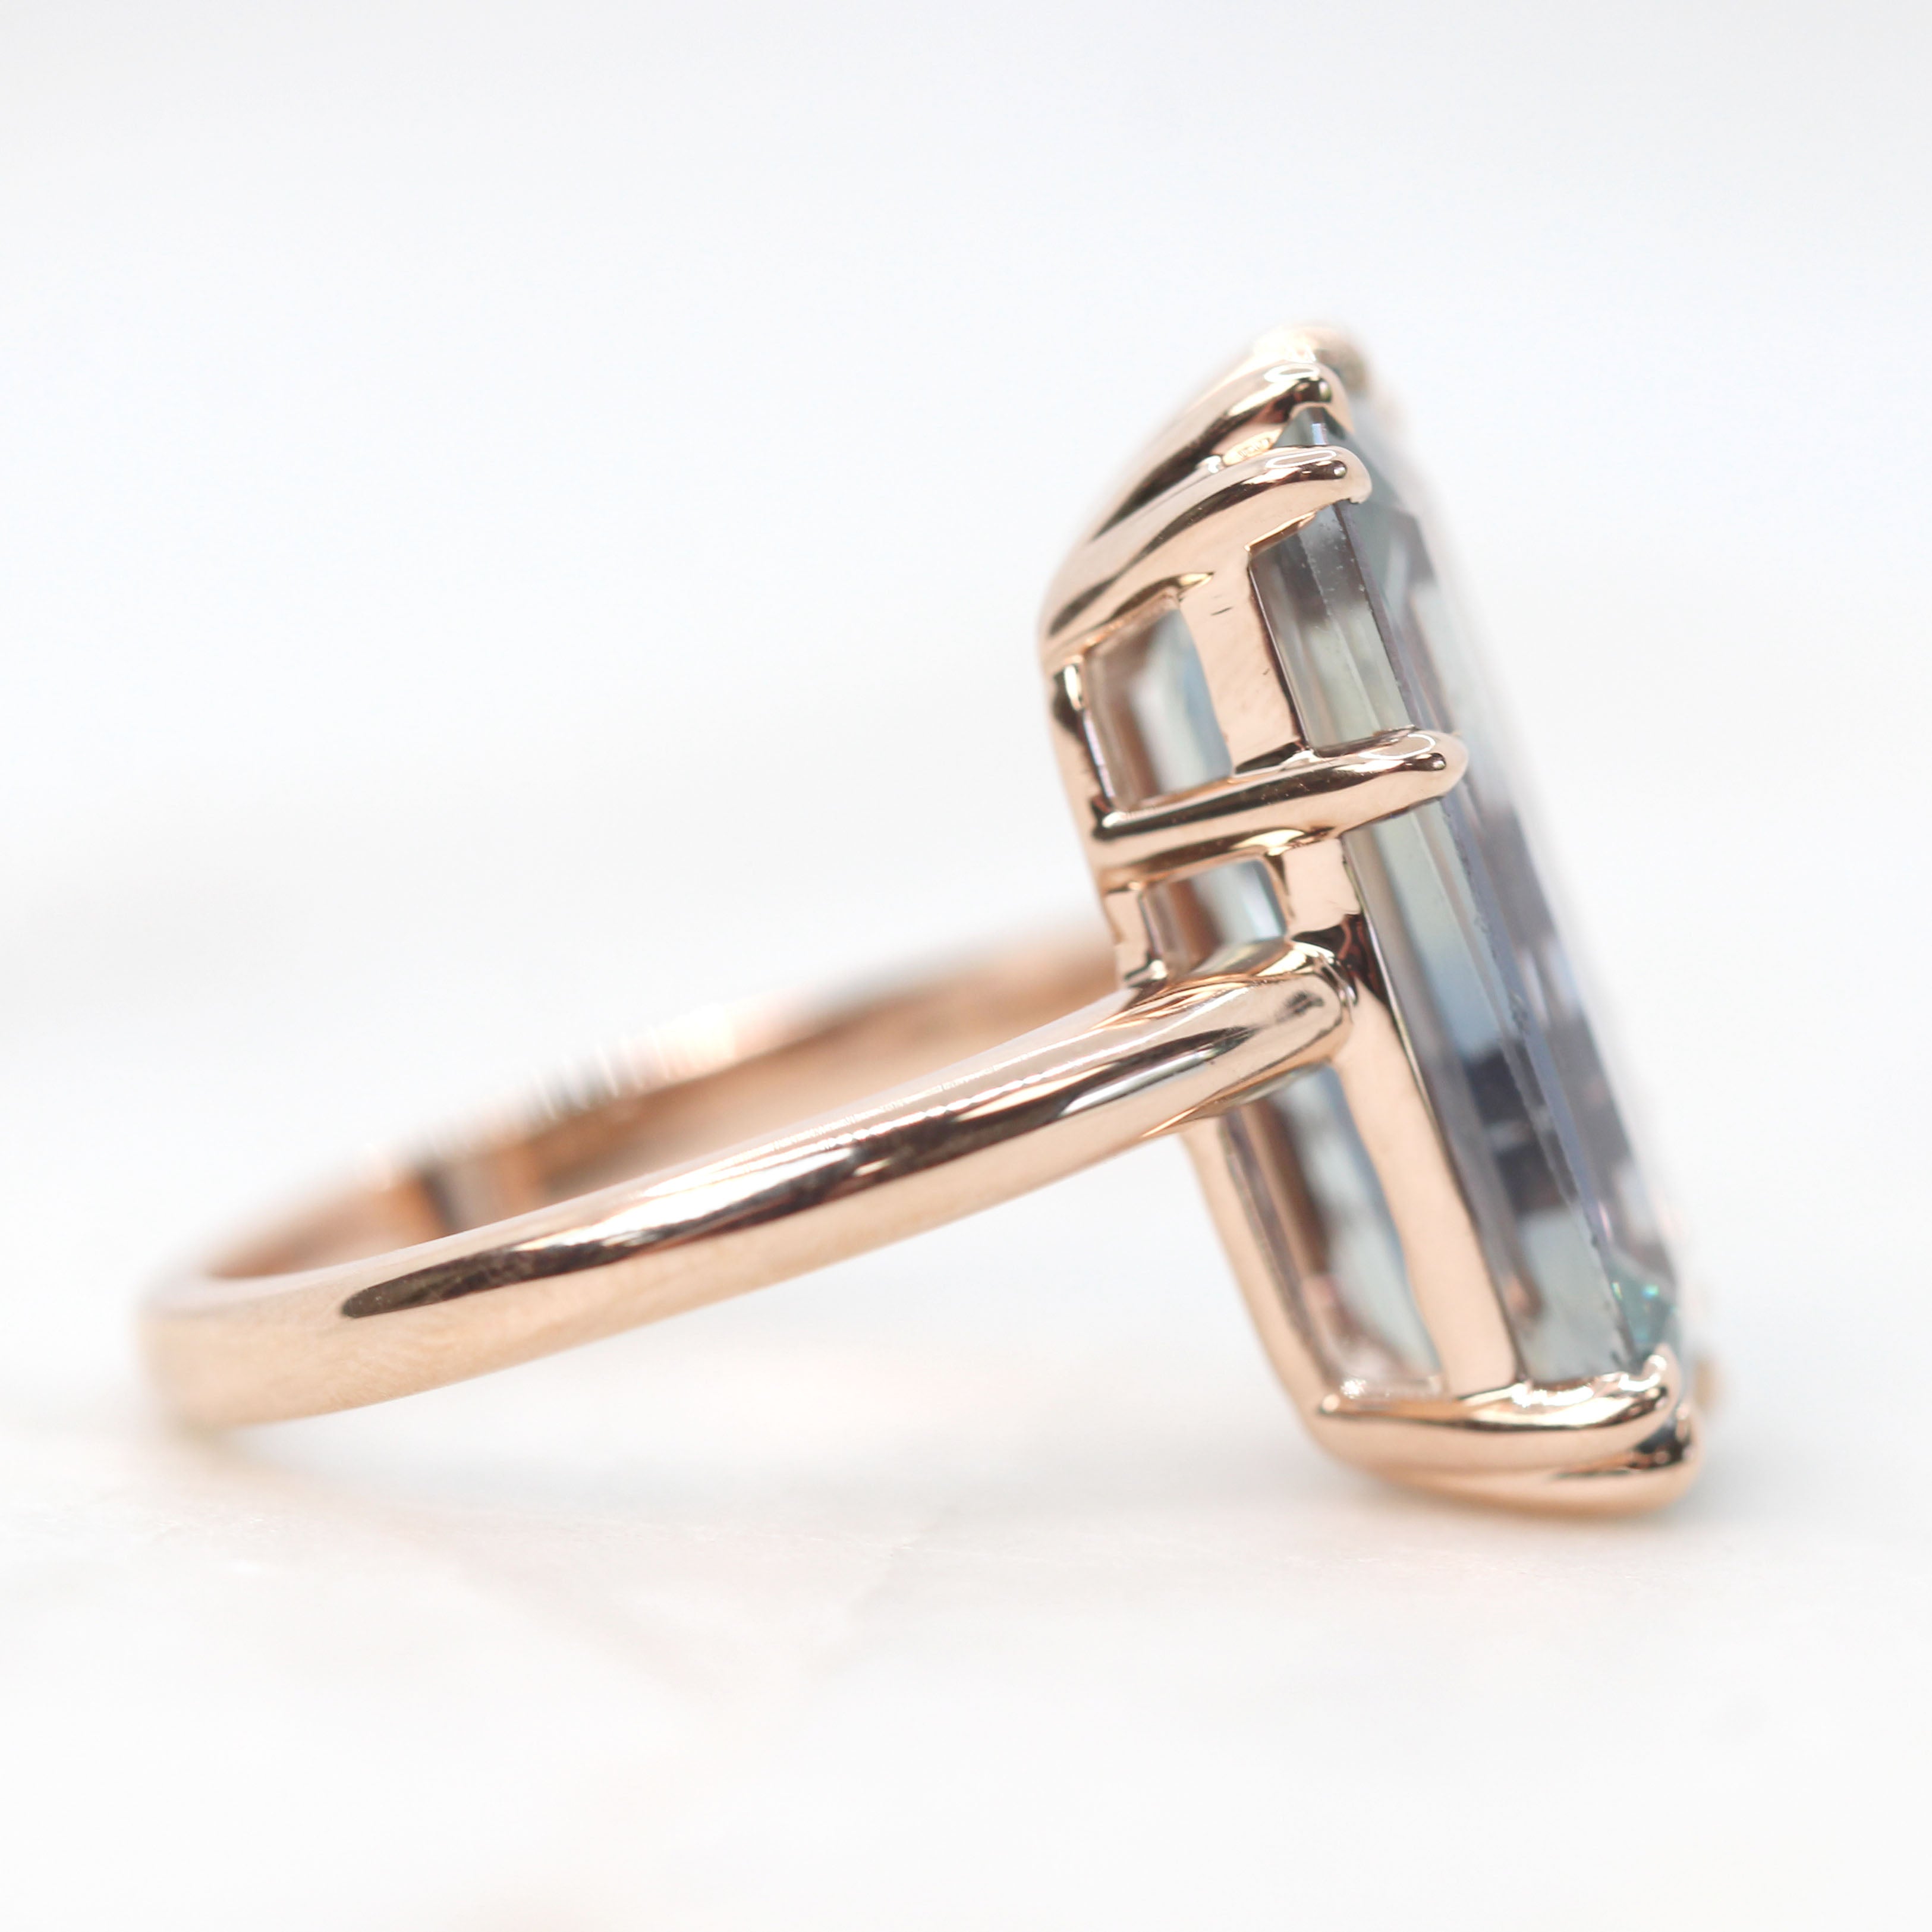 Elena Ring with a 10.75 Carat Emerald Cut Green Blue Bi-Color Sapphire in 14k Rose Gold - Ready to Size and Ship - Midwinter Co. Alternative Bridal Rings and Modern Fine Jewelry